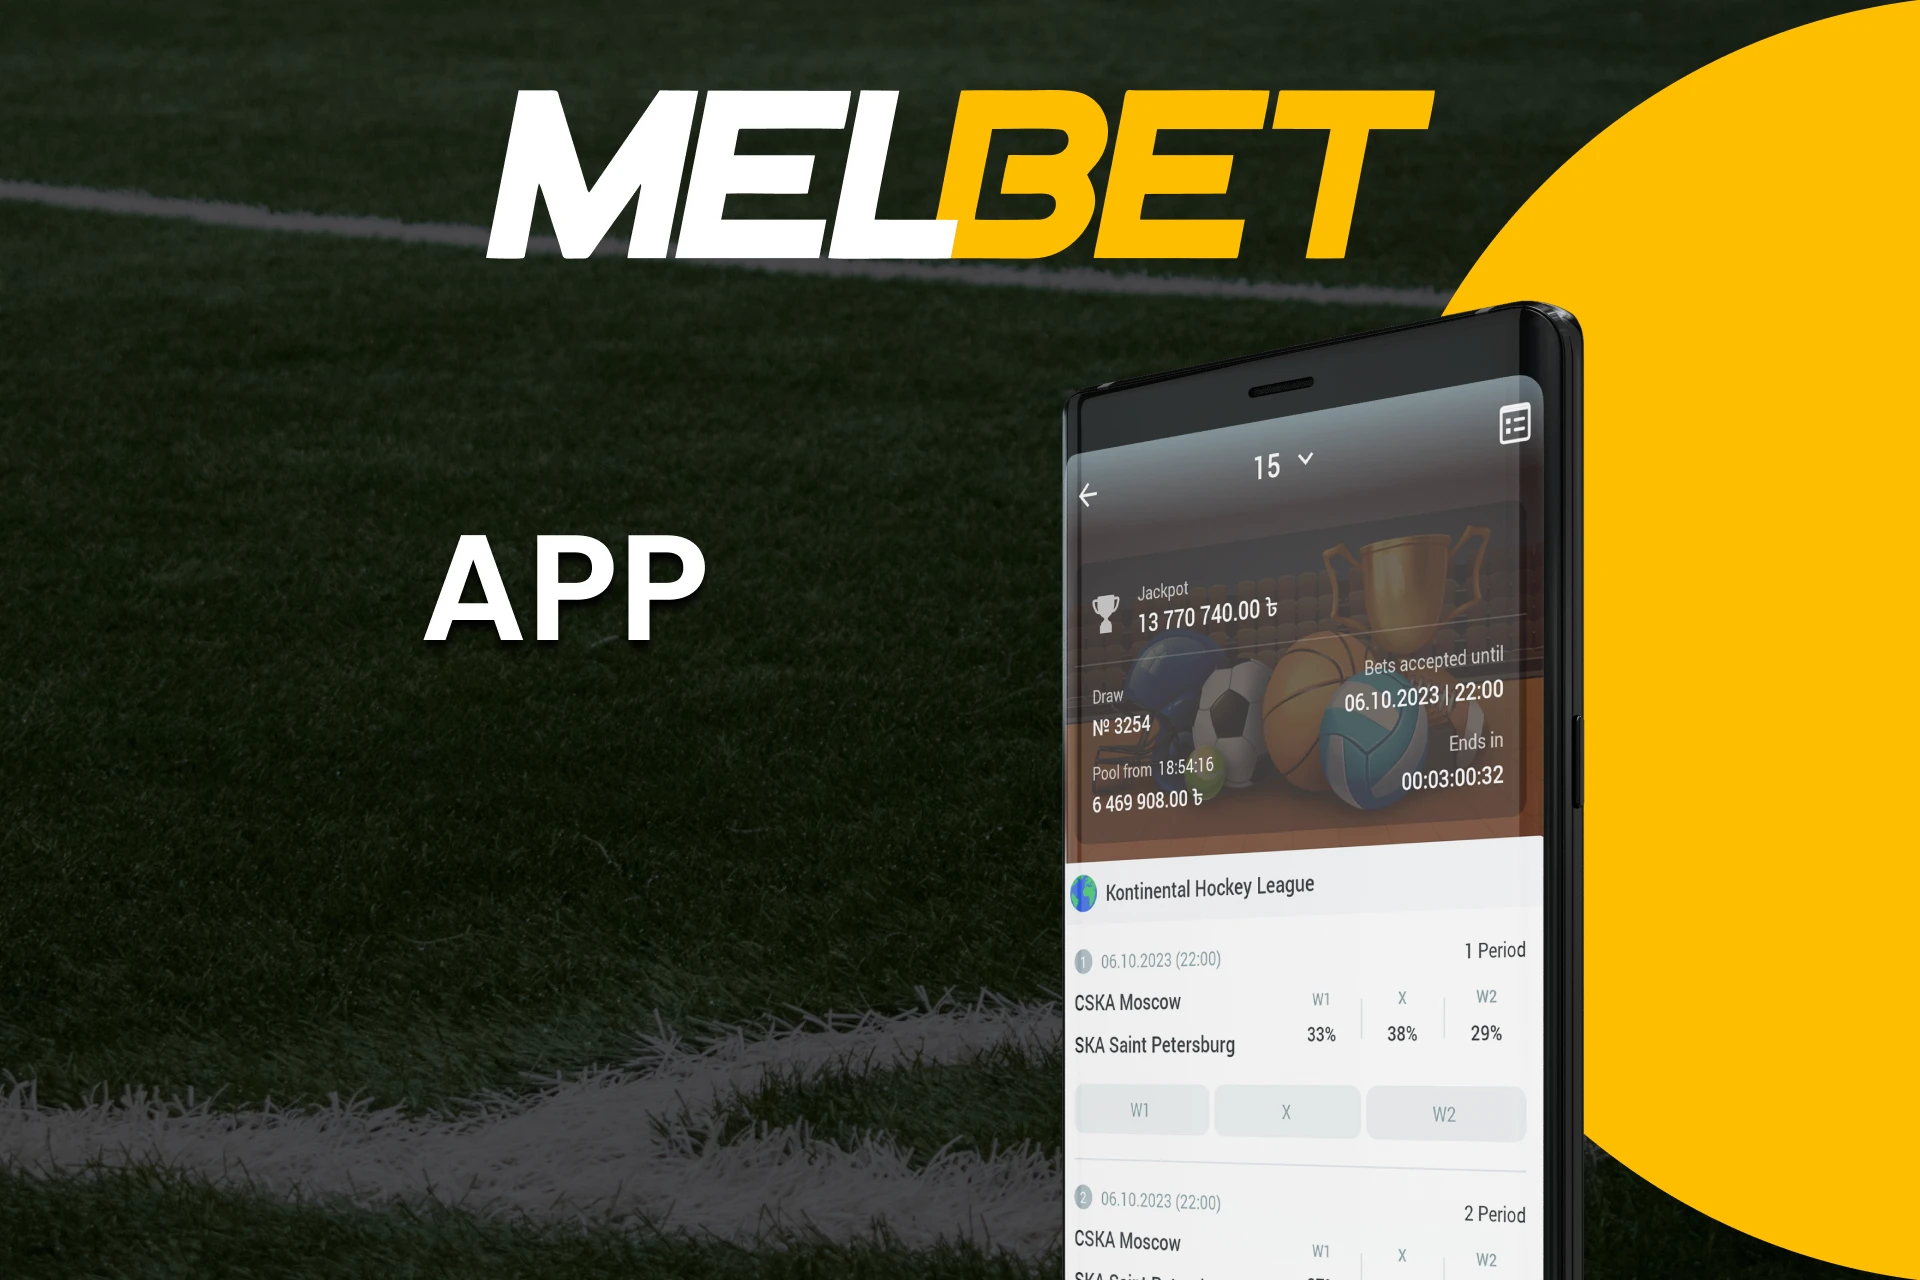 Download the Melbet app to bet on TOTO.